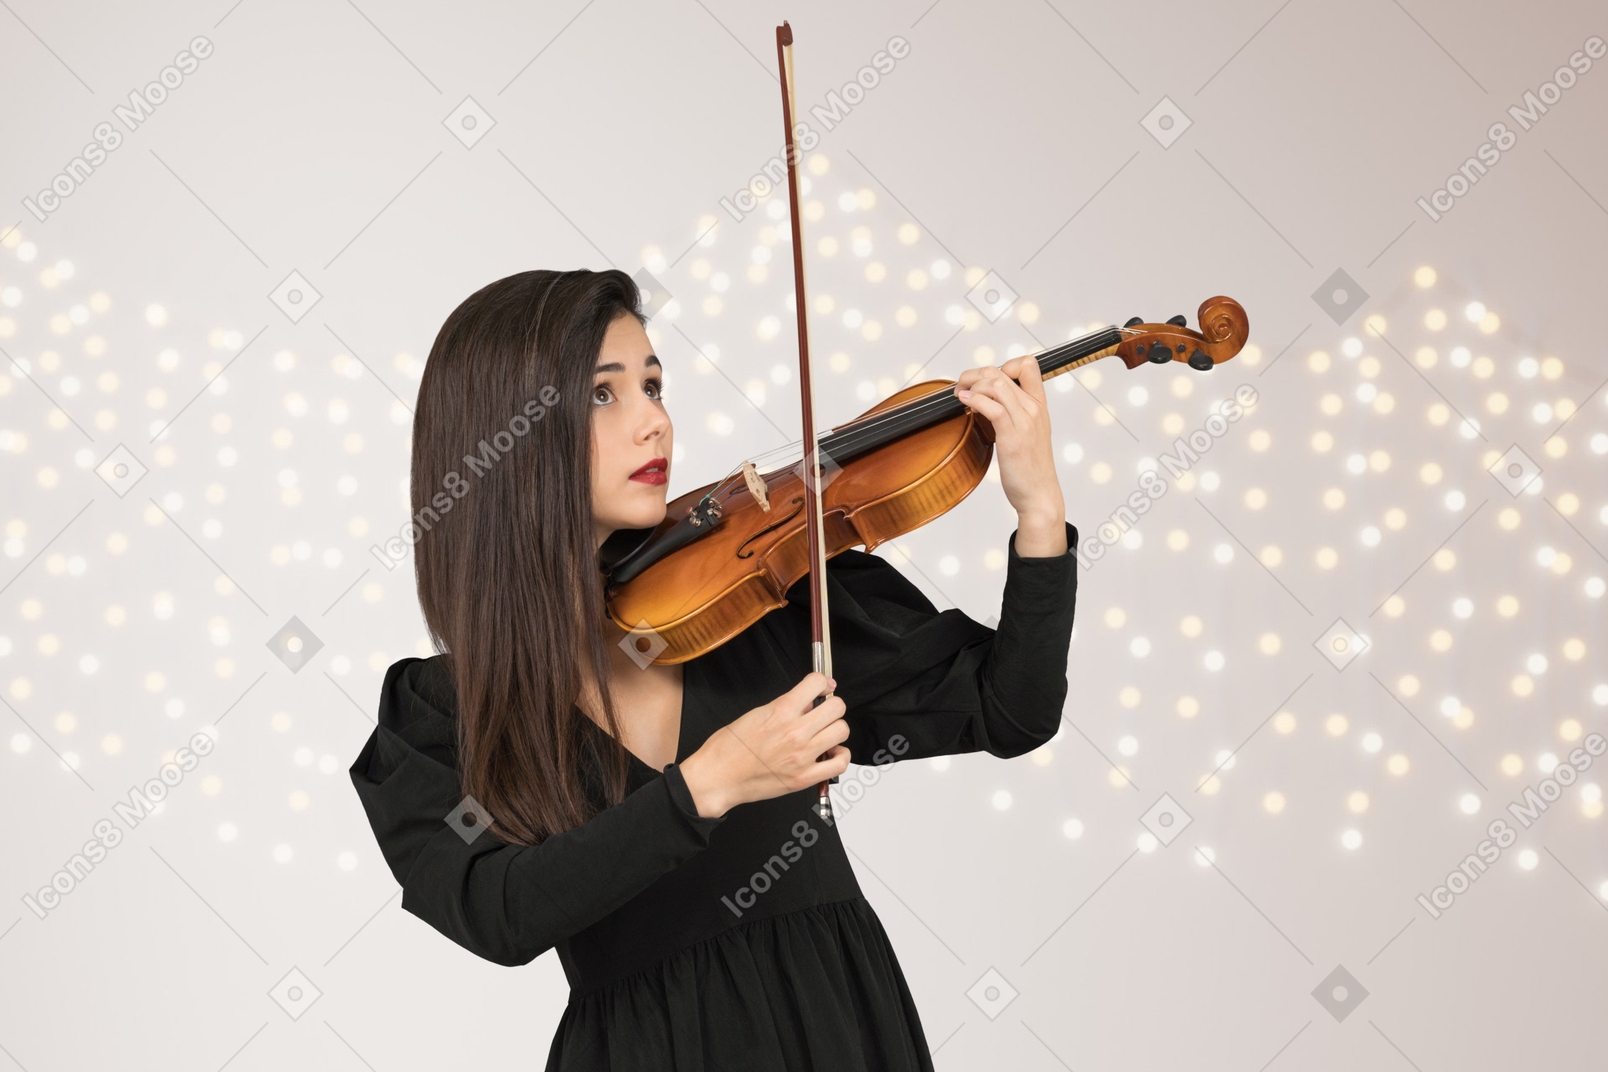 A woman in a black dress playing a violin